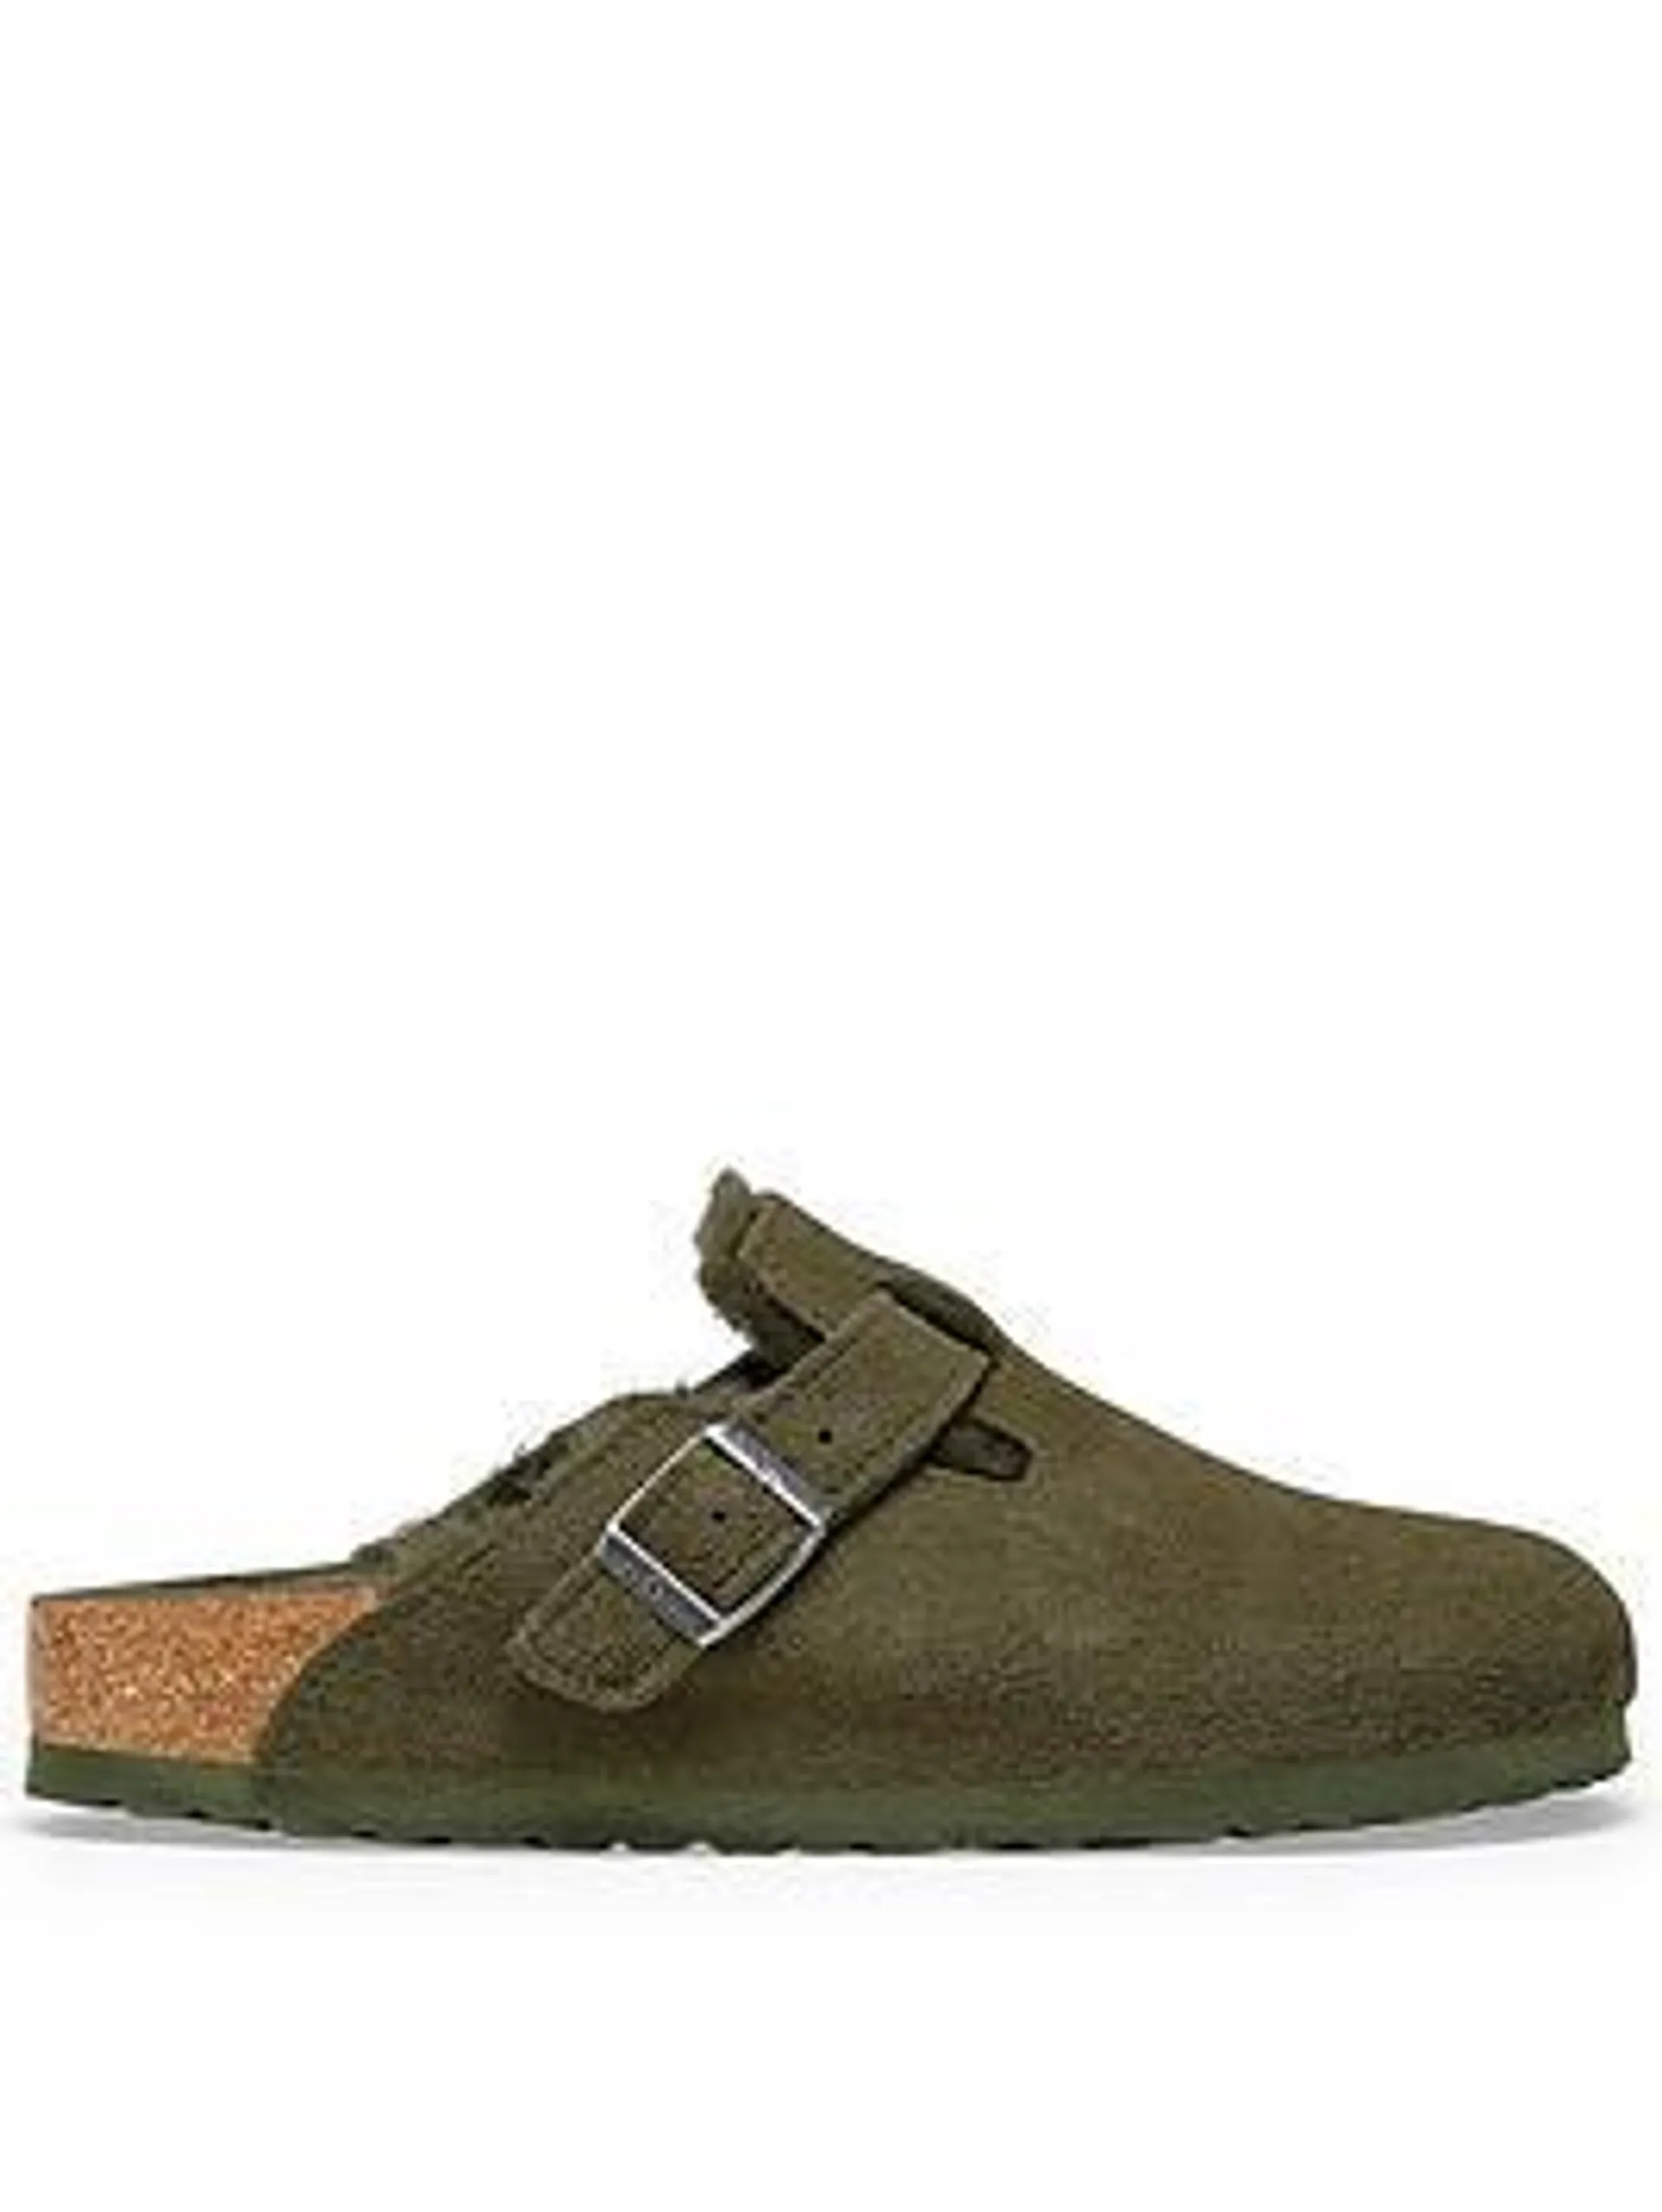 Boston Shearling Wider Fit Clogs - Thyme